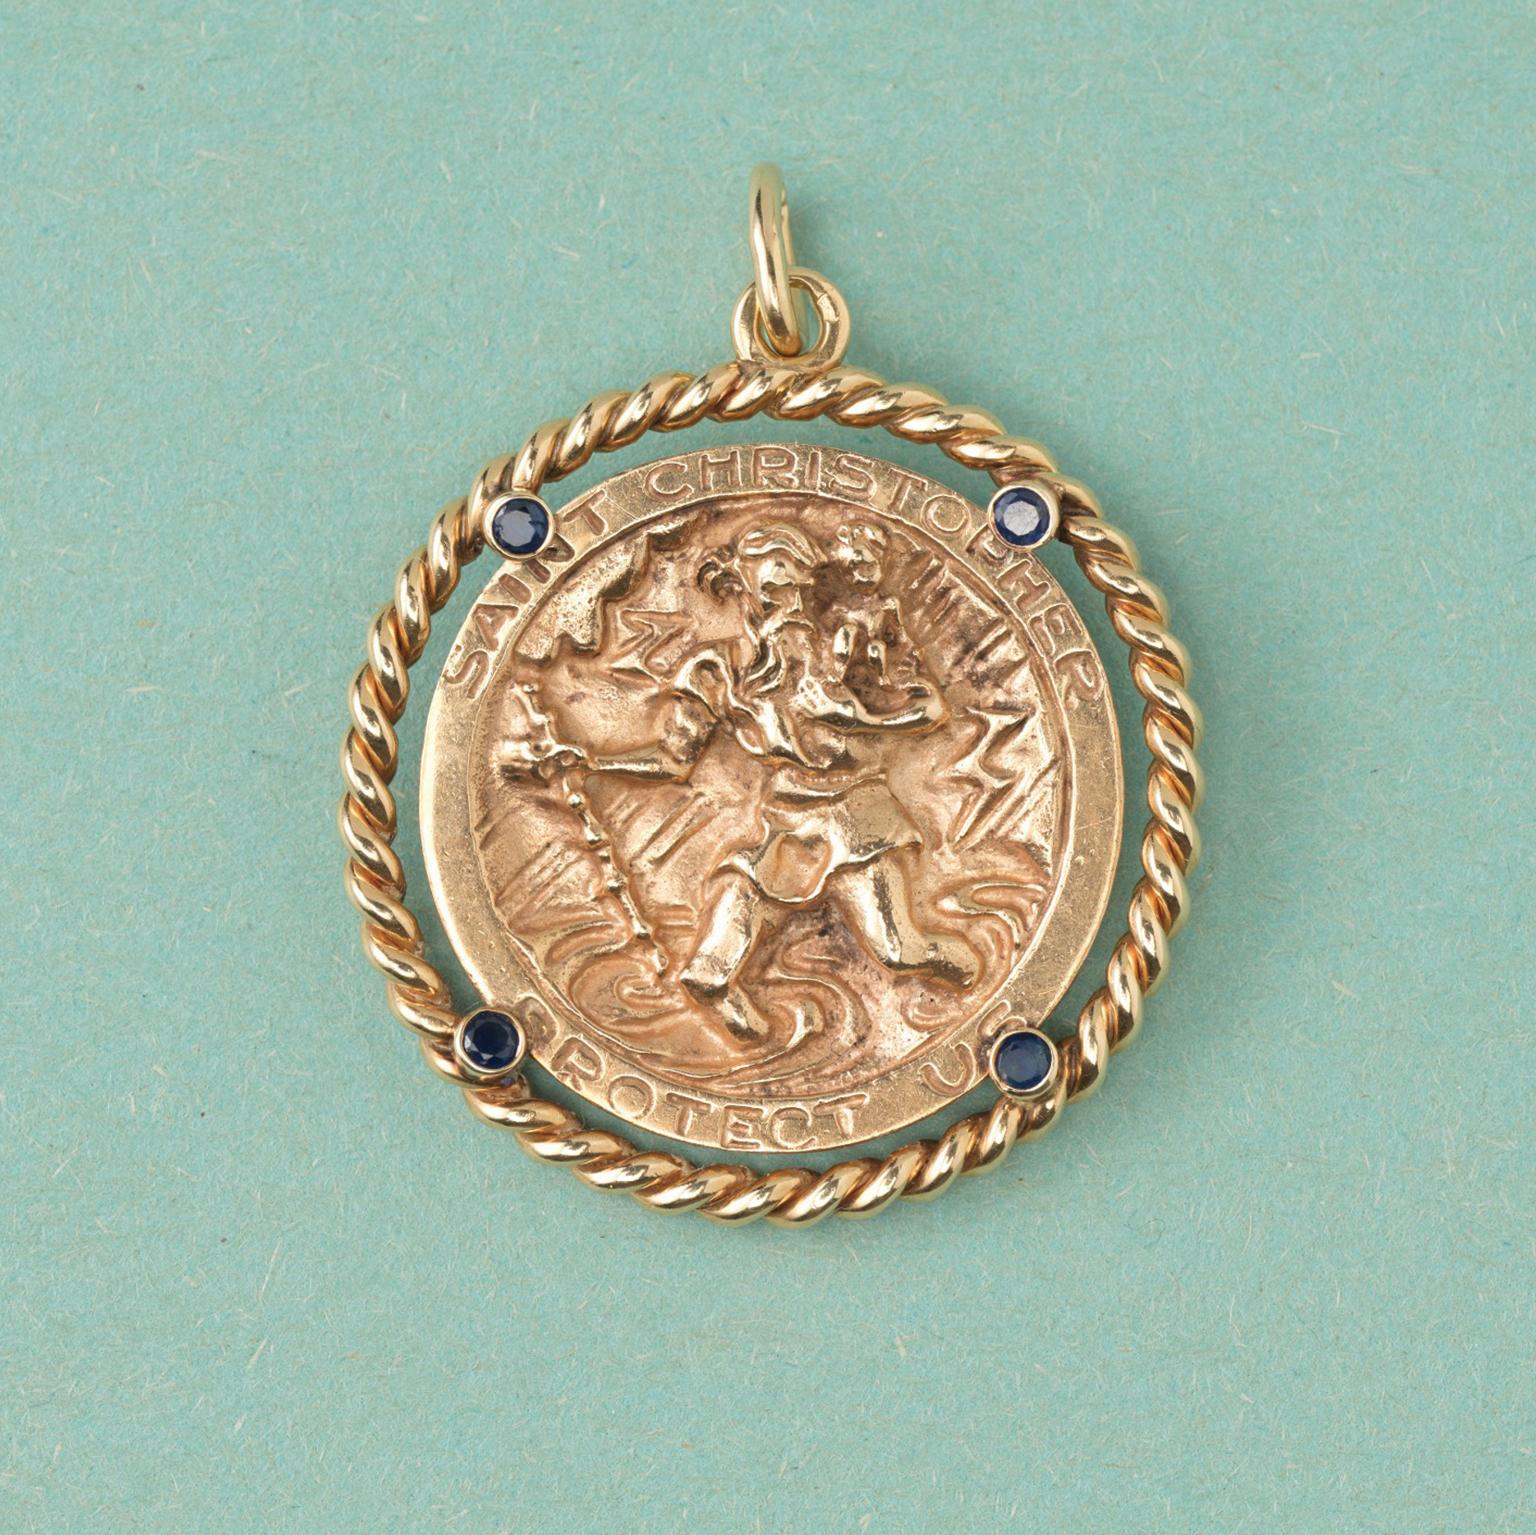 A large 14 carat gold pendant with Saint Christopher and the text: ‘Saint Christopher Protect Us’, decorated with a border of twisted gold rope and four round sapphires, American, circa 1970.

weight: 25.35 gram
dimensions: 5 x 3.8 cm